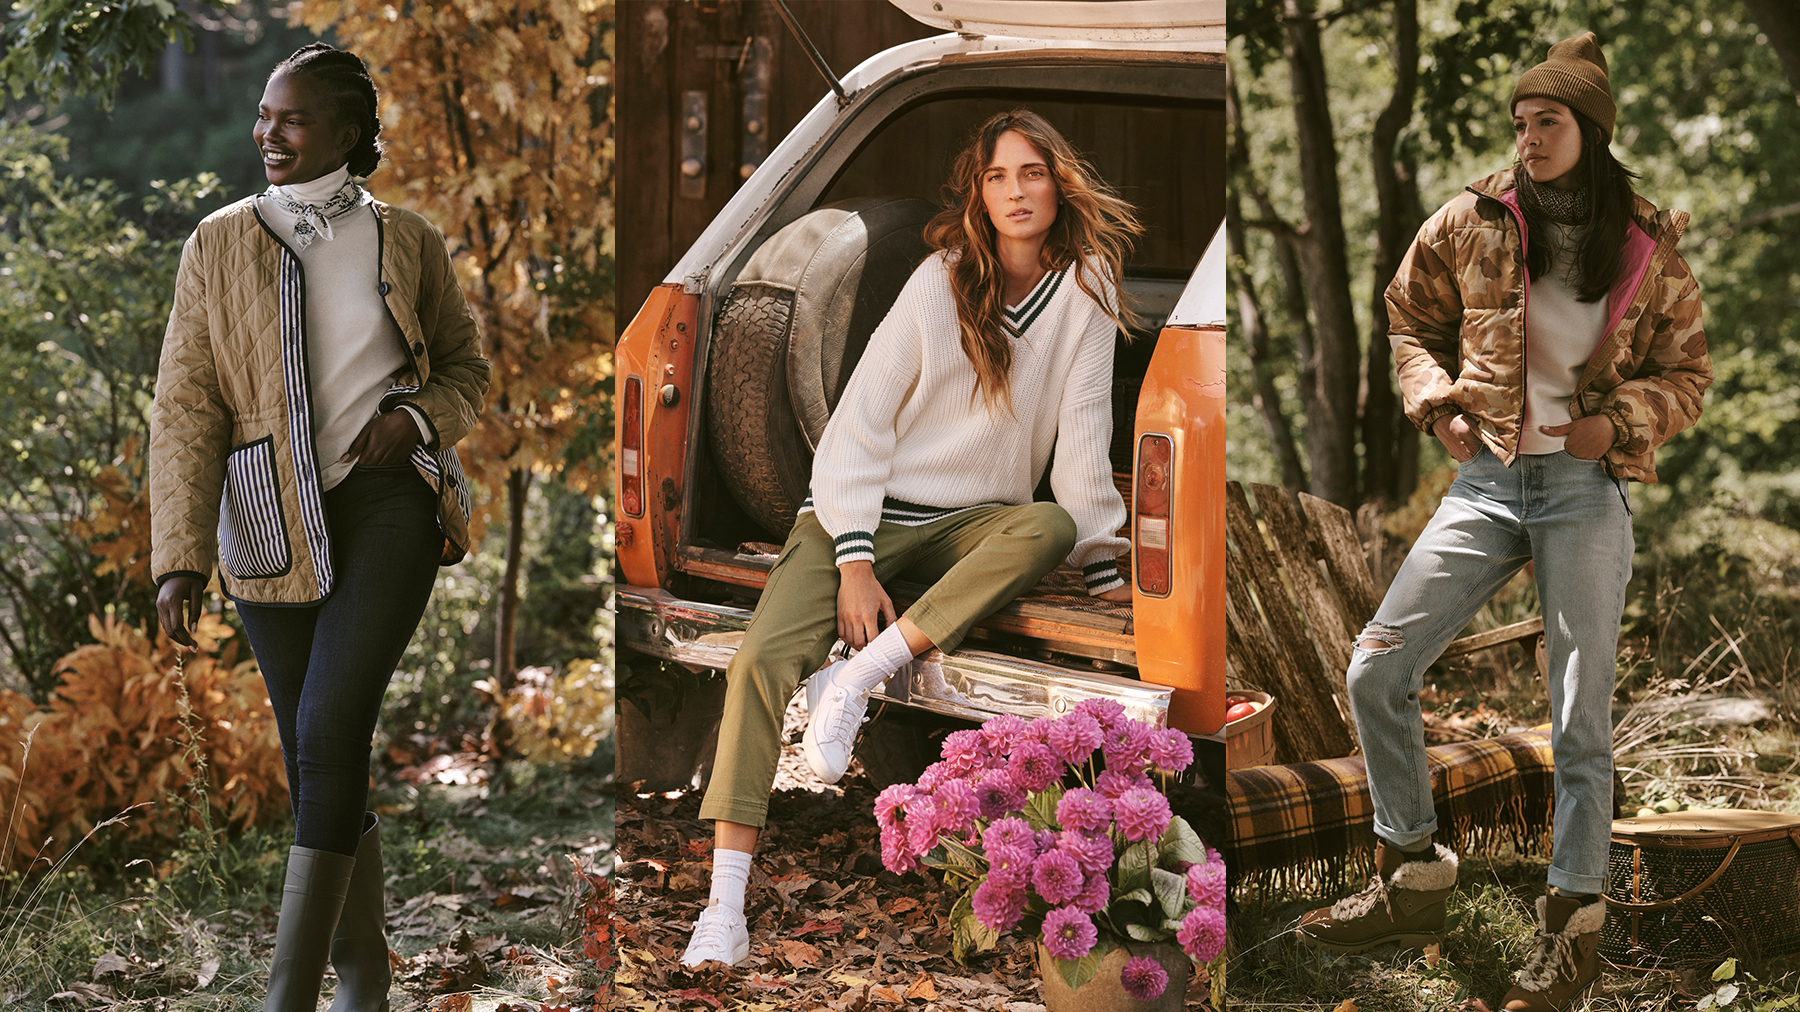 The 5 Looks You Need for Fall's Favorite Outdoor Activities